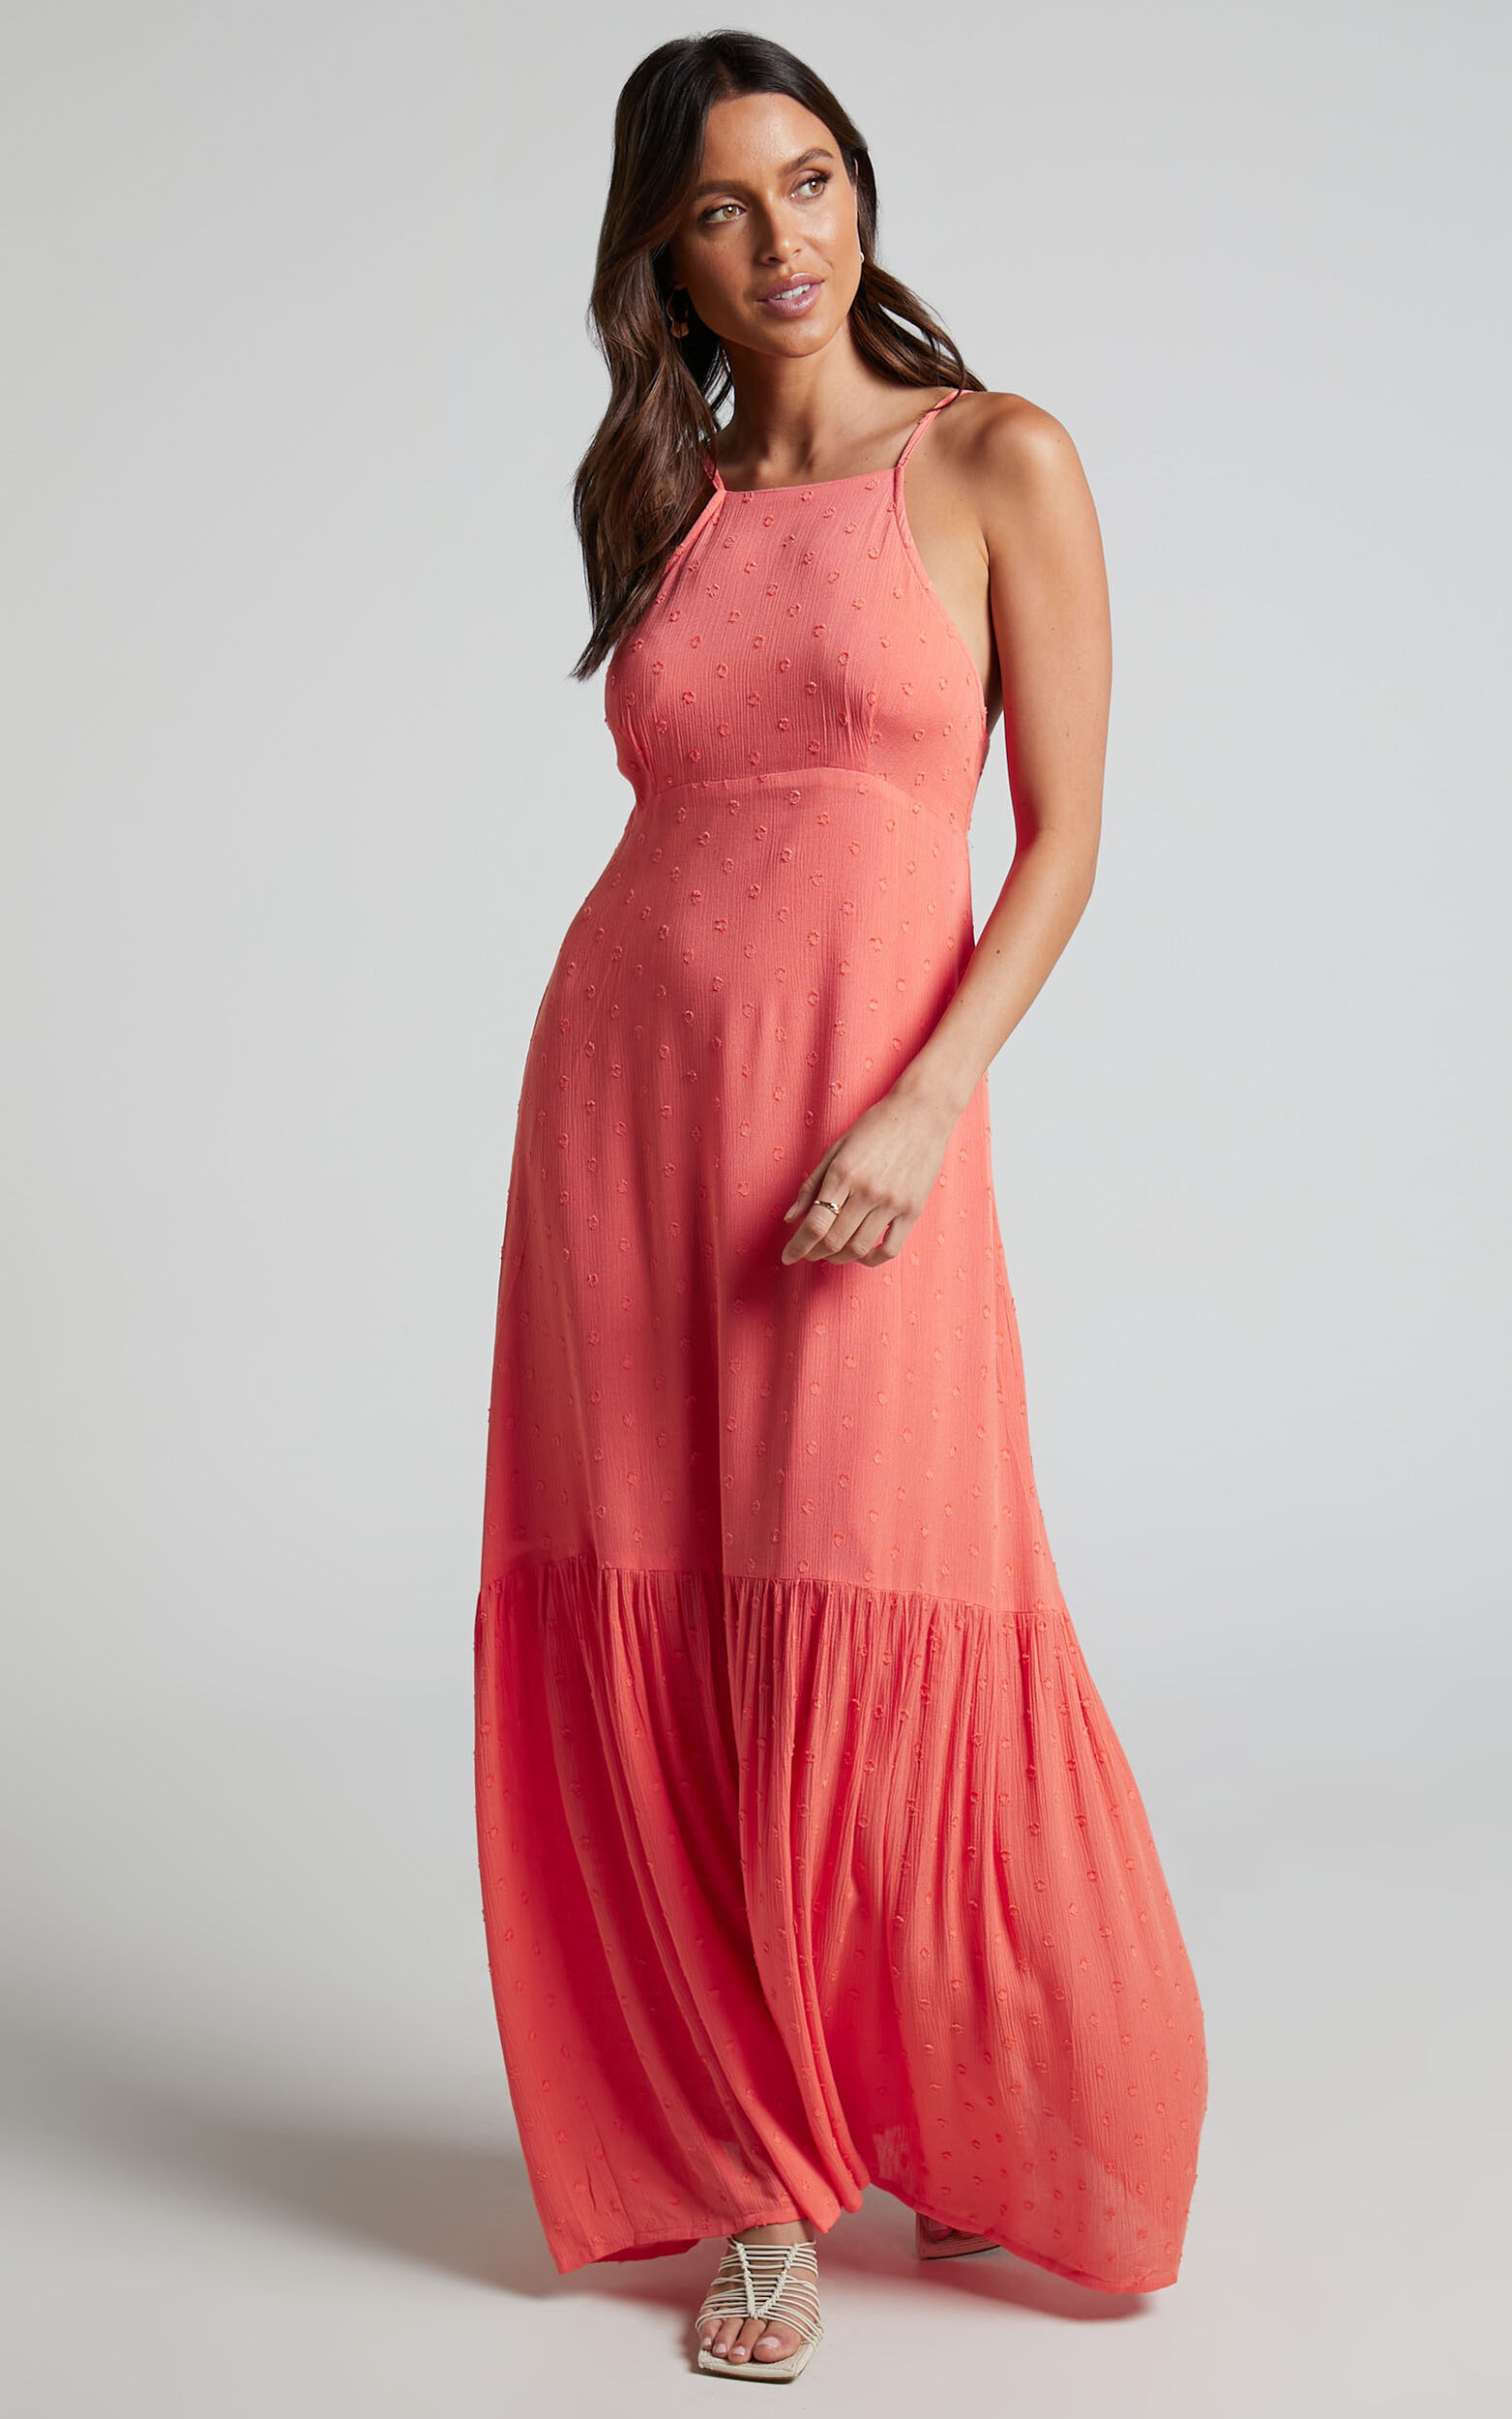 Cariele Midaxi Dress - Strappy Tiered Dotted Dress in Coral - 06, PNK2